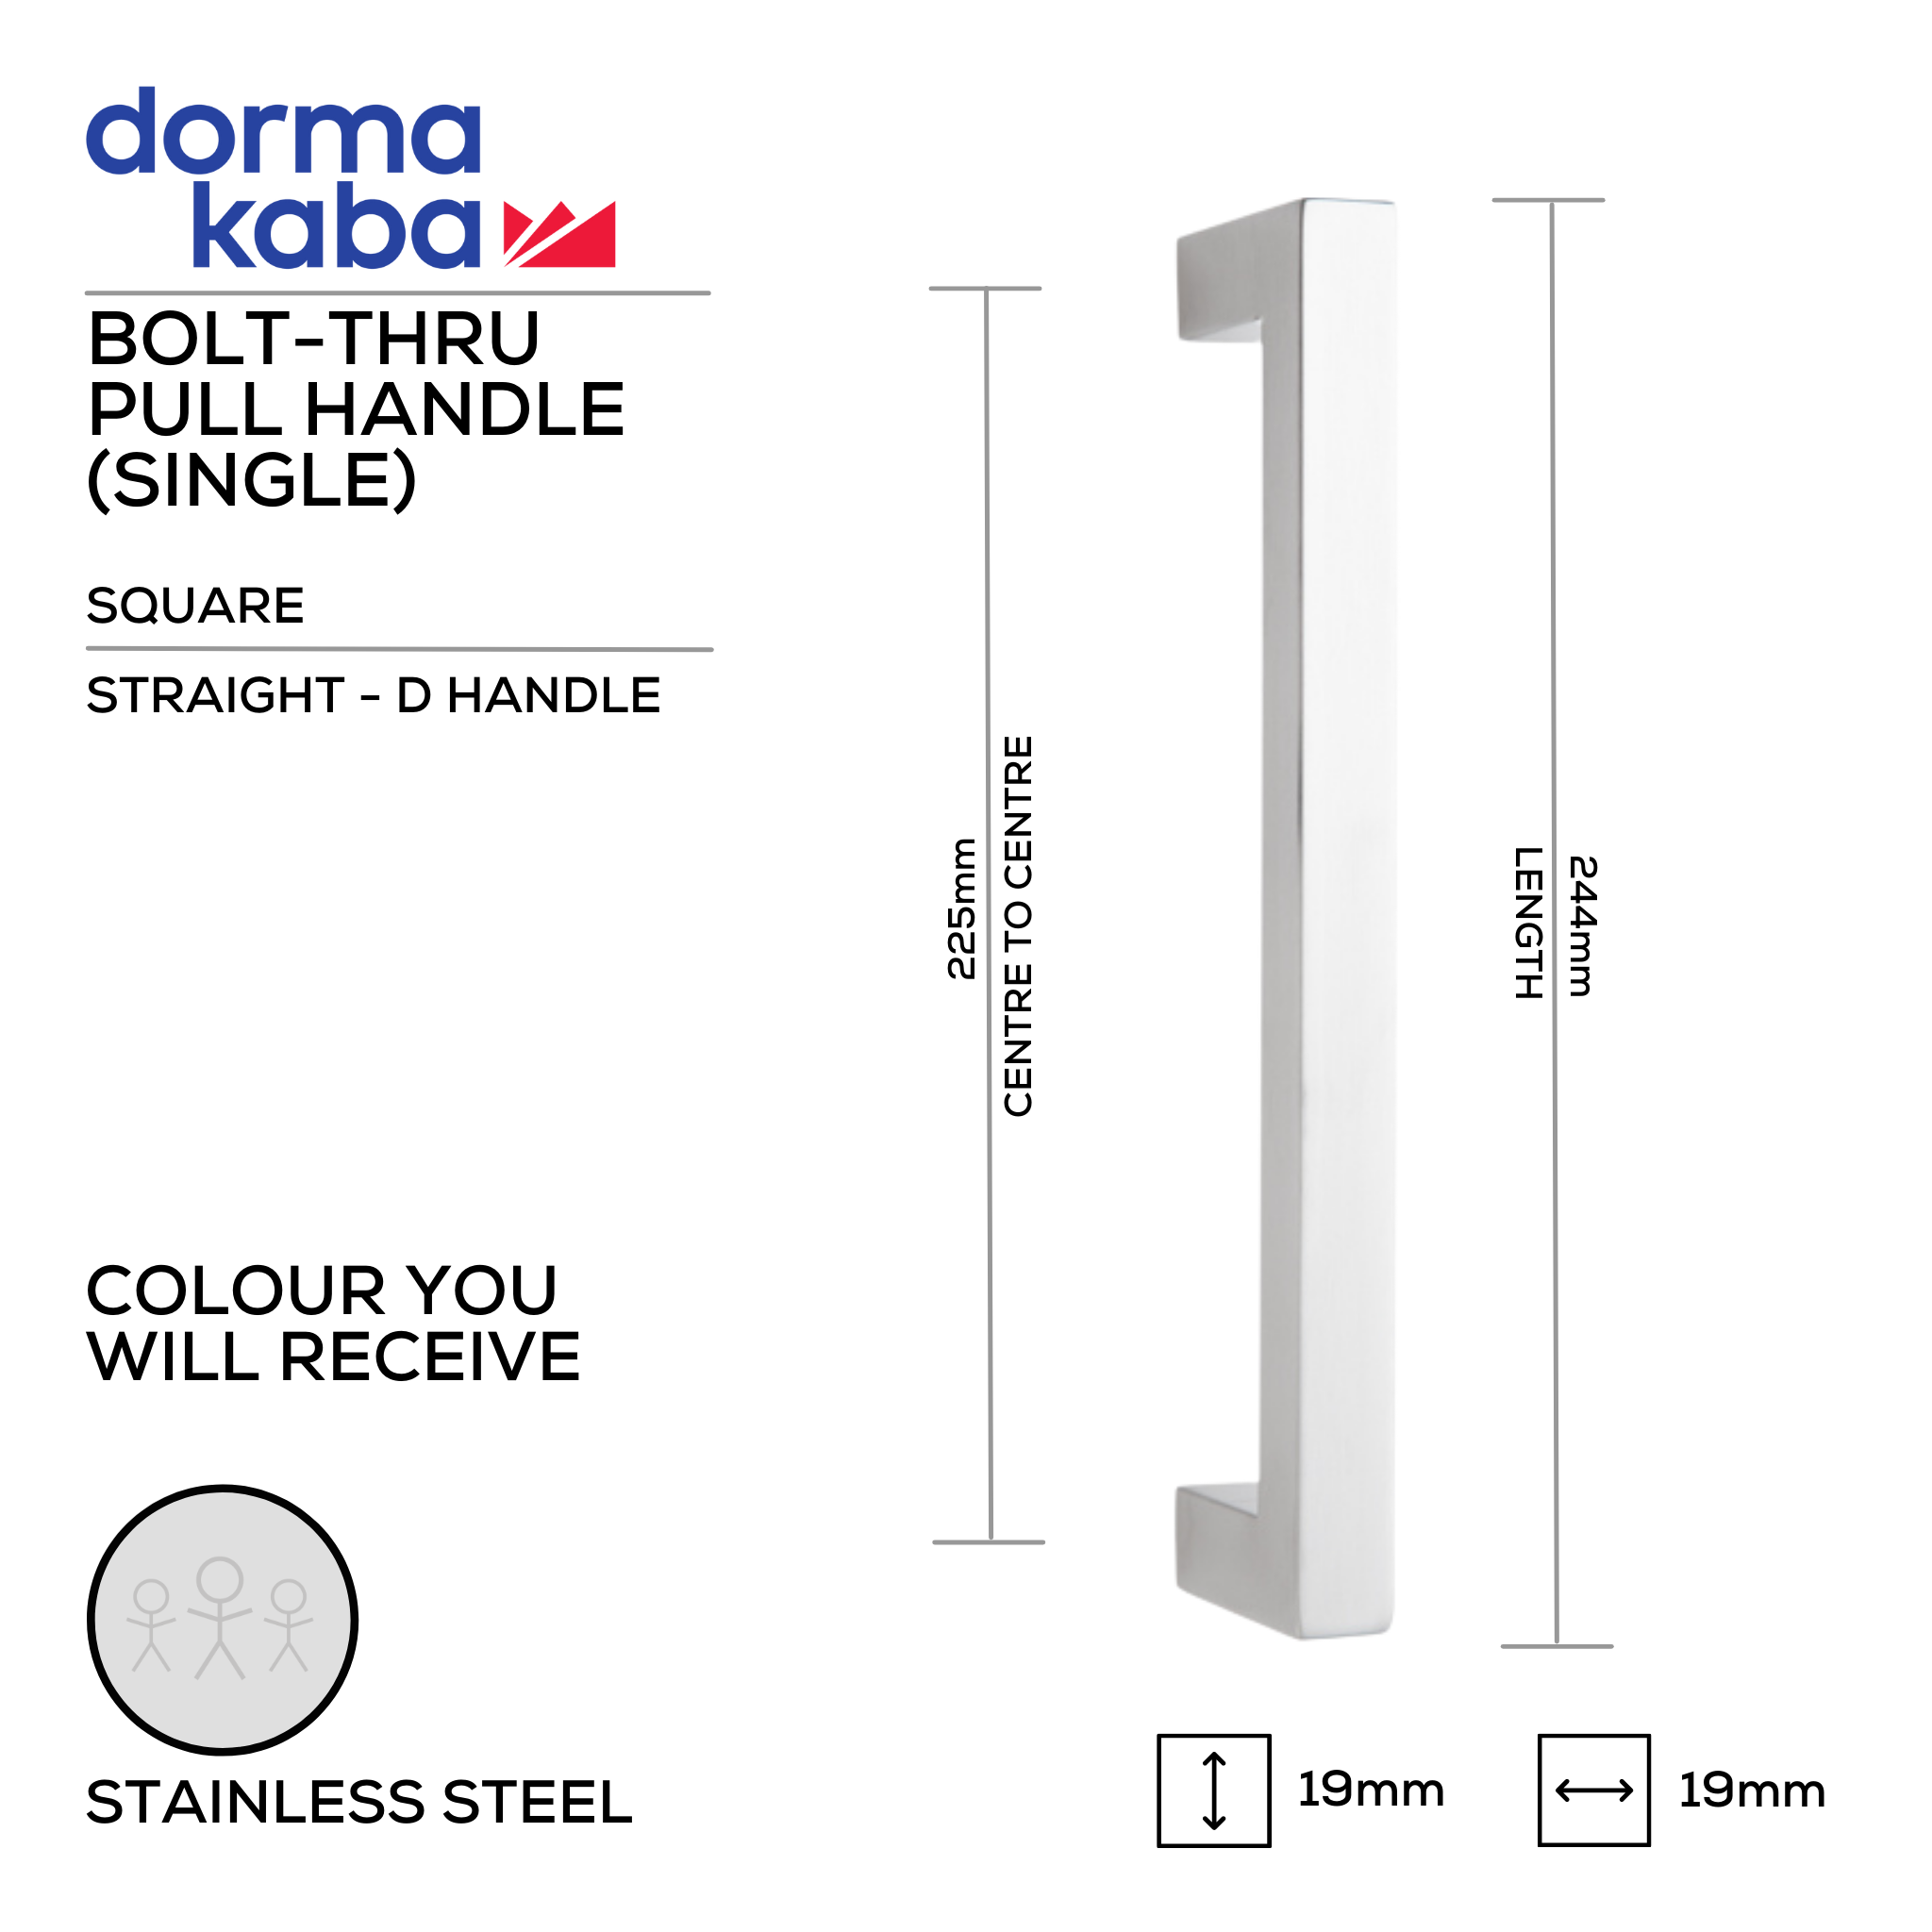 DSQ 06H 225 BT, Pull Handle, Square, Straight, D Handle, BoltThru, 19mm (d) x 244mm (l) x 225mm (ctc), Stainless Steel, DORMAKABA